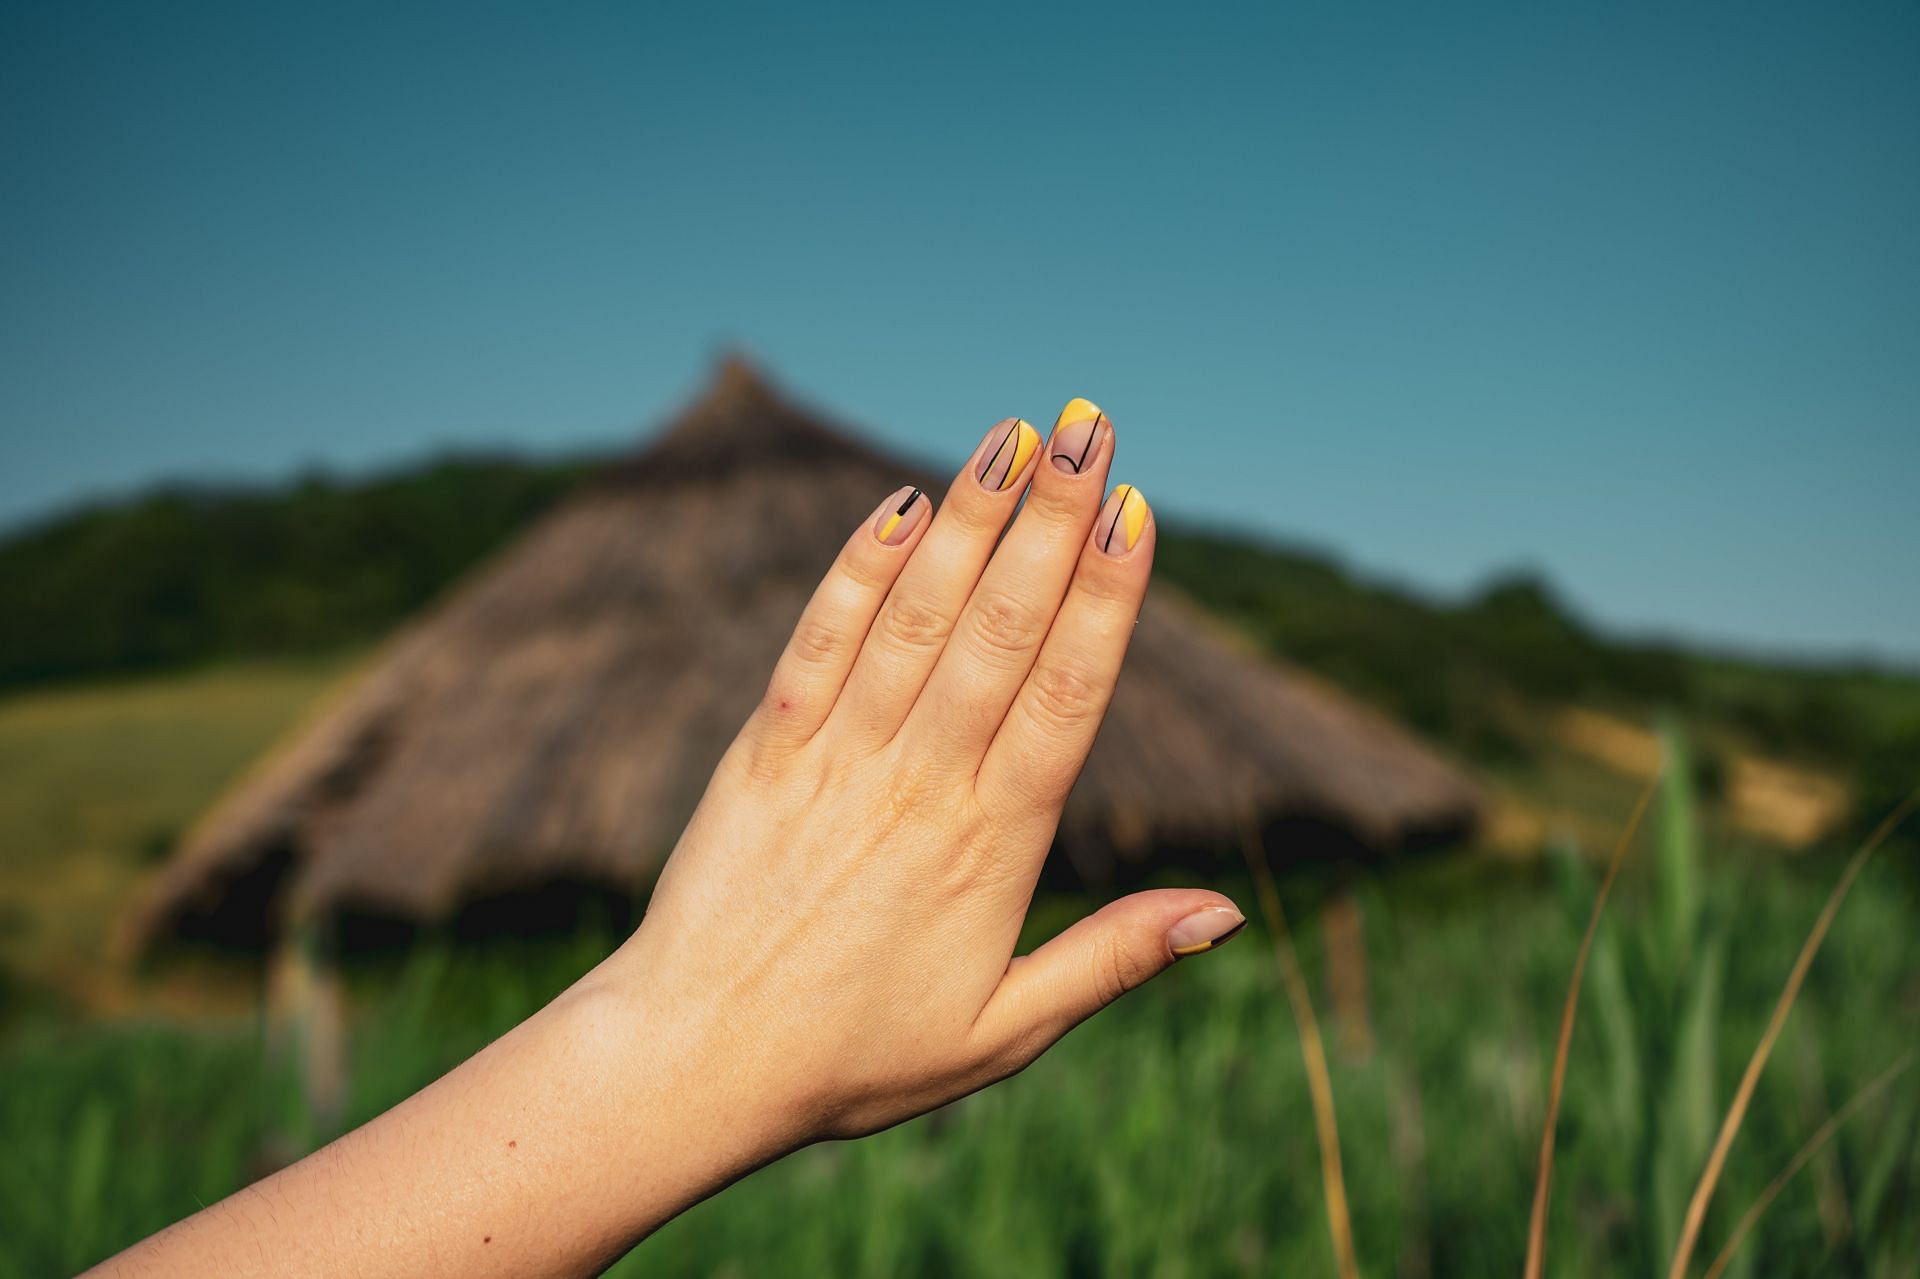 Understanding heath issues through nails  (image sourced via Pexels / Photo by Vlad)